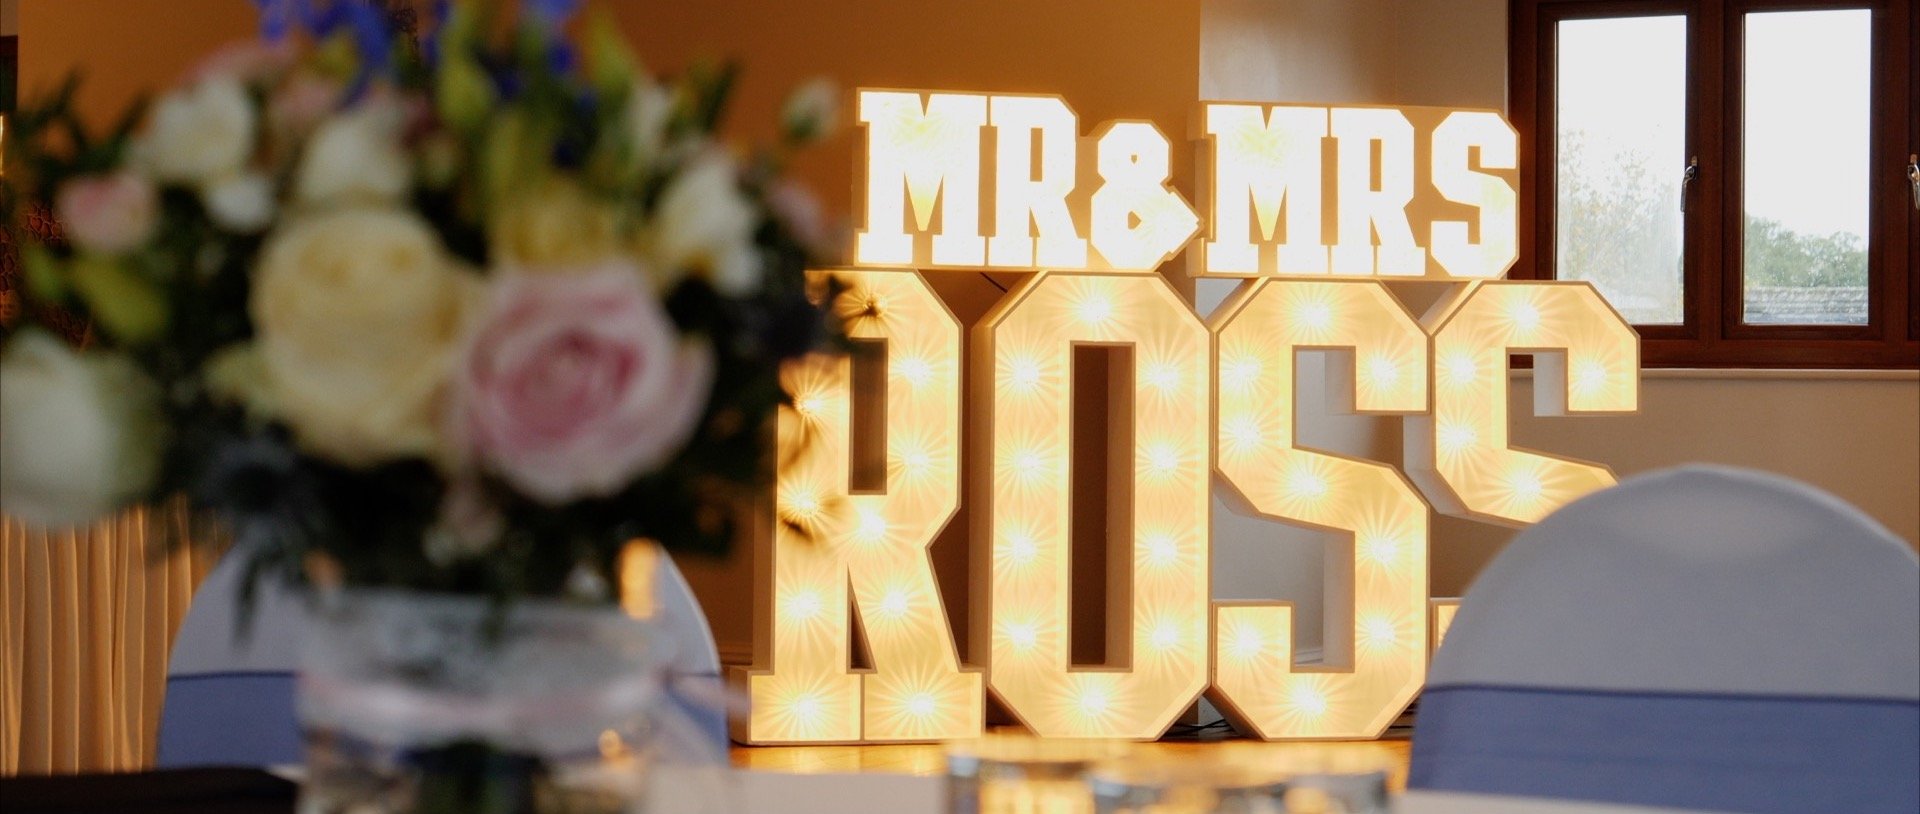 Mr and Mrs Ross wedding at the Rayleigh Club.jpg